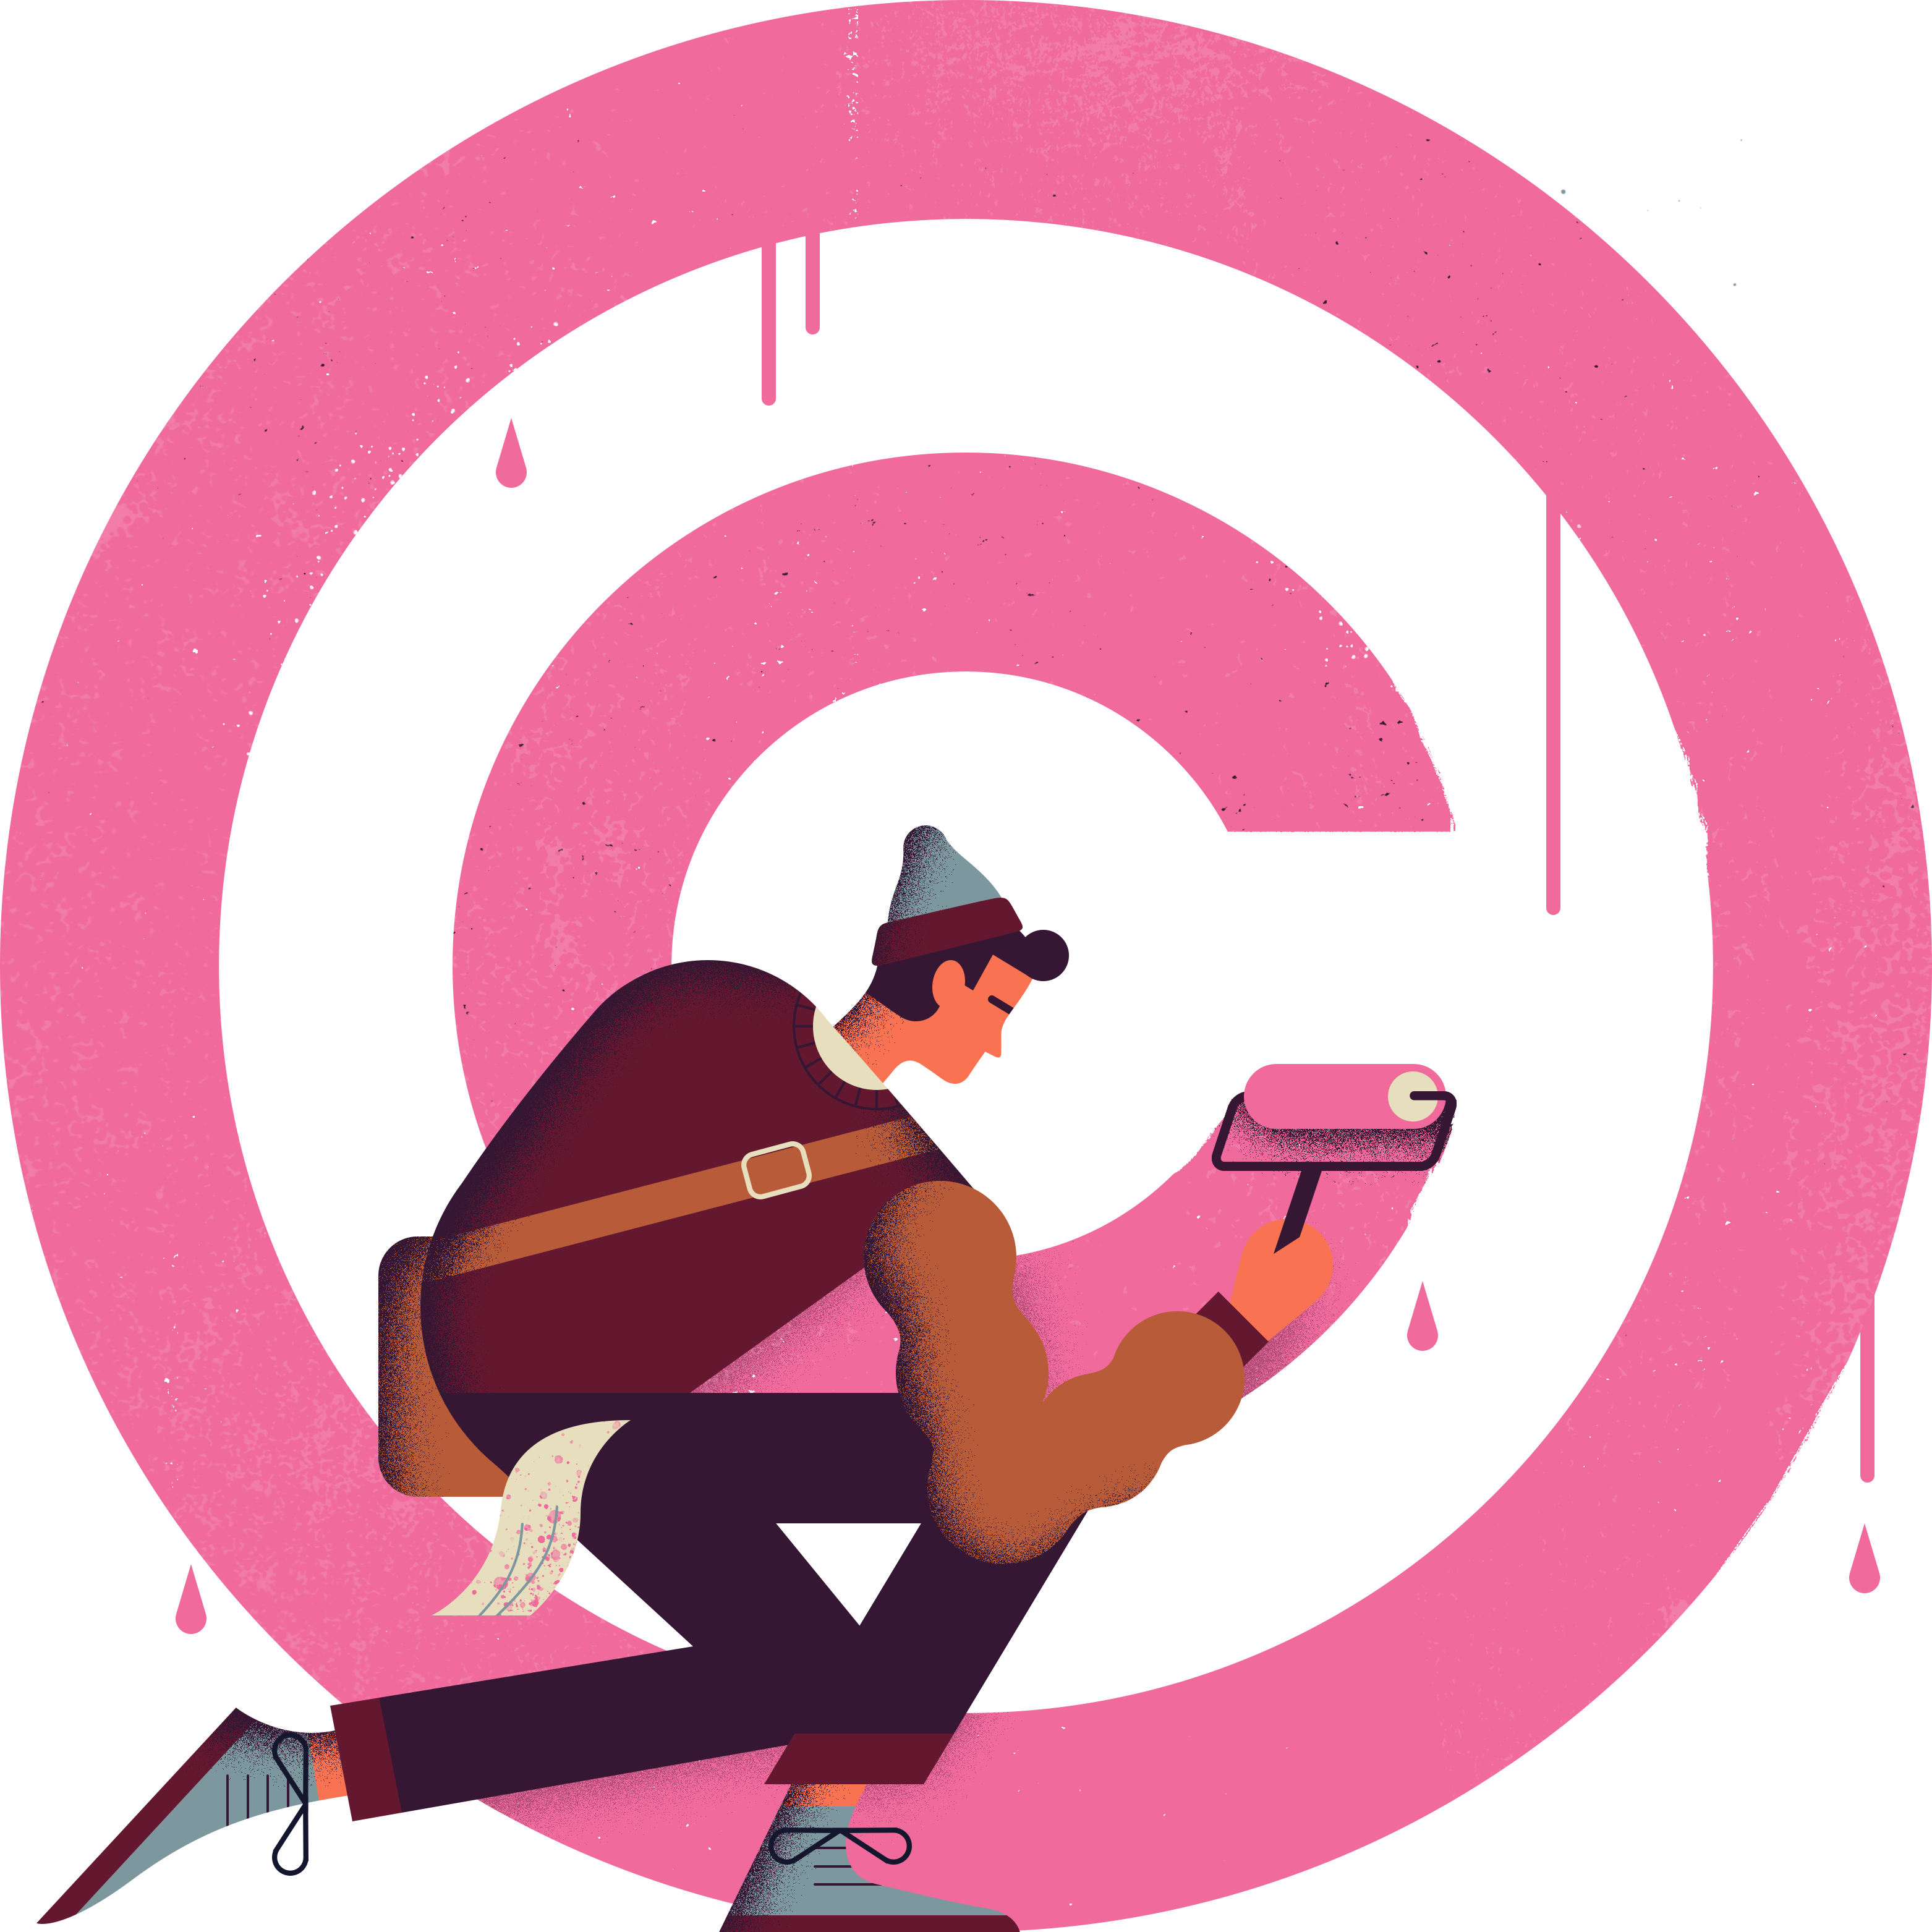 Guide to copyright and licensing 1